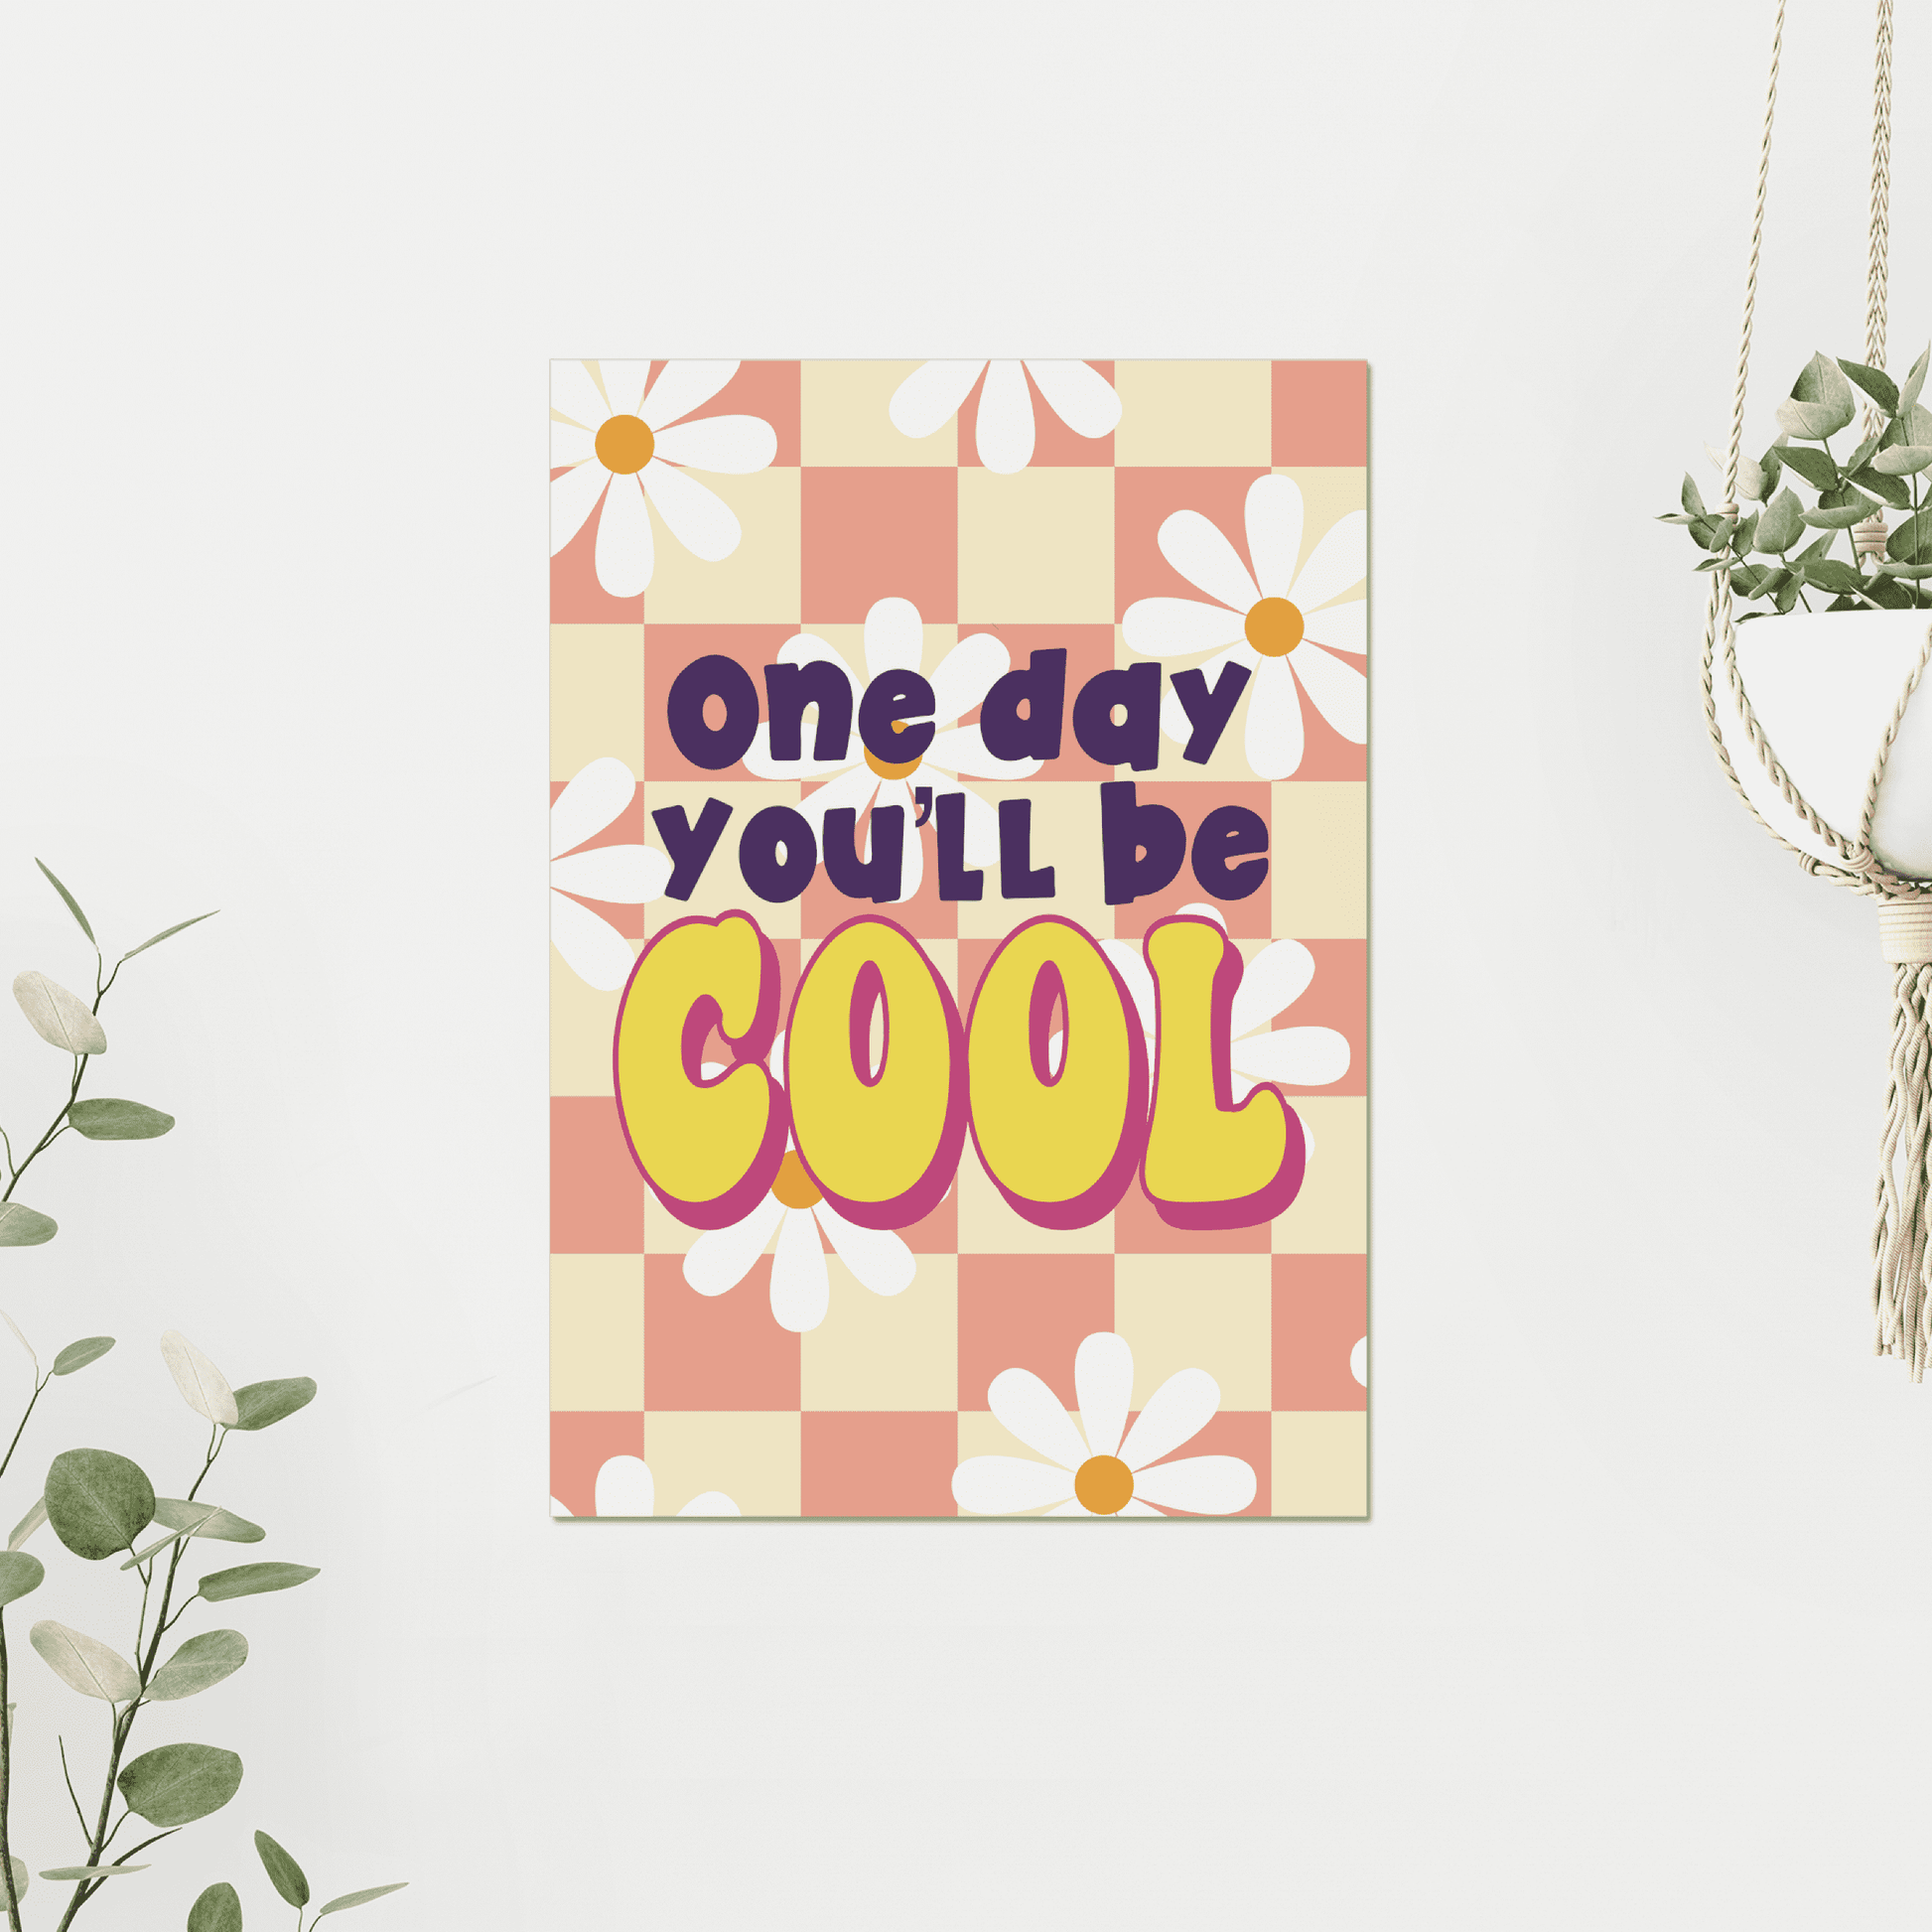 A weirdly motivational art print that is perfect for any Almost Famous fan!